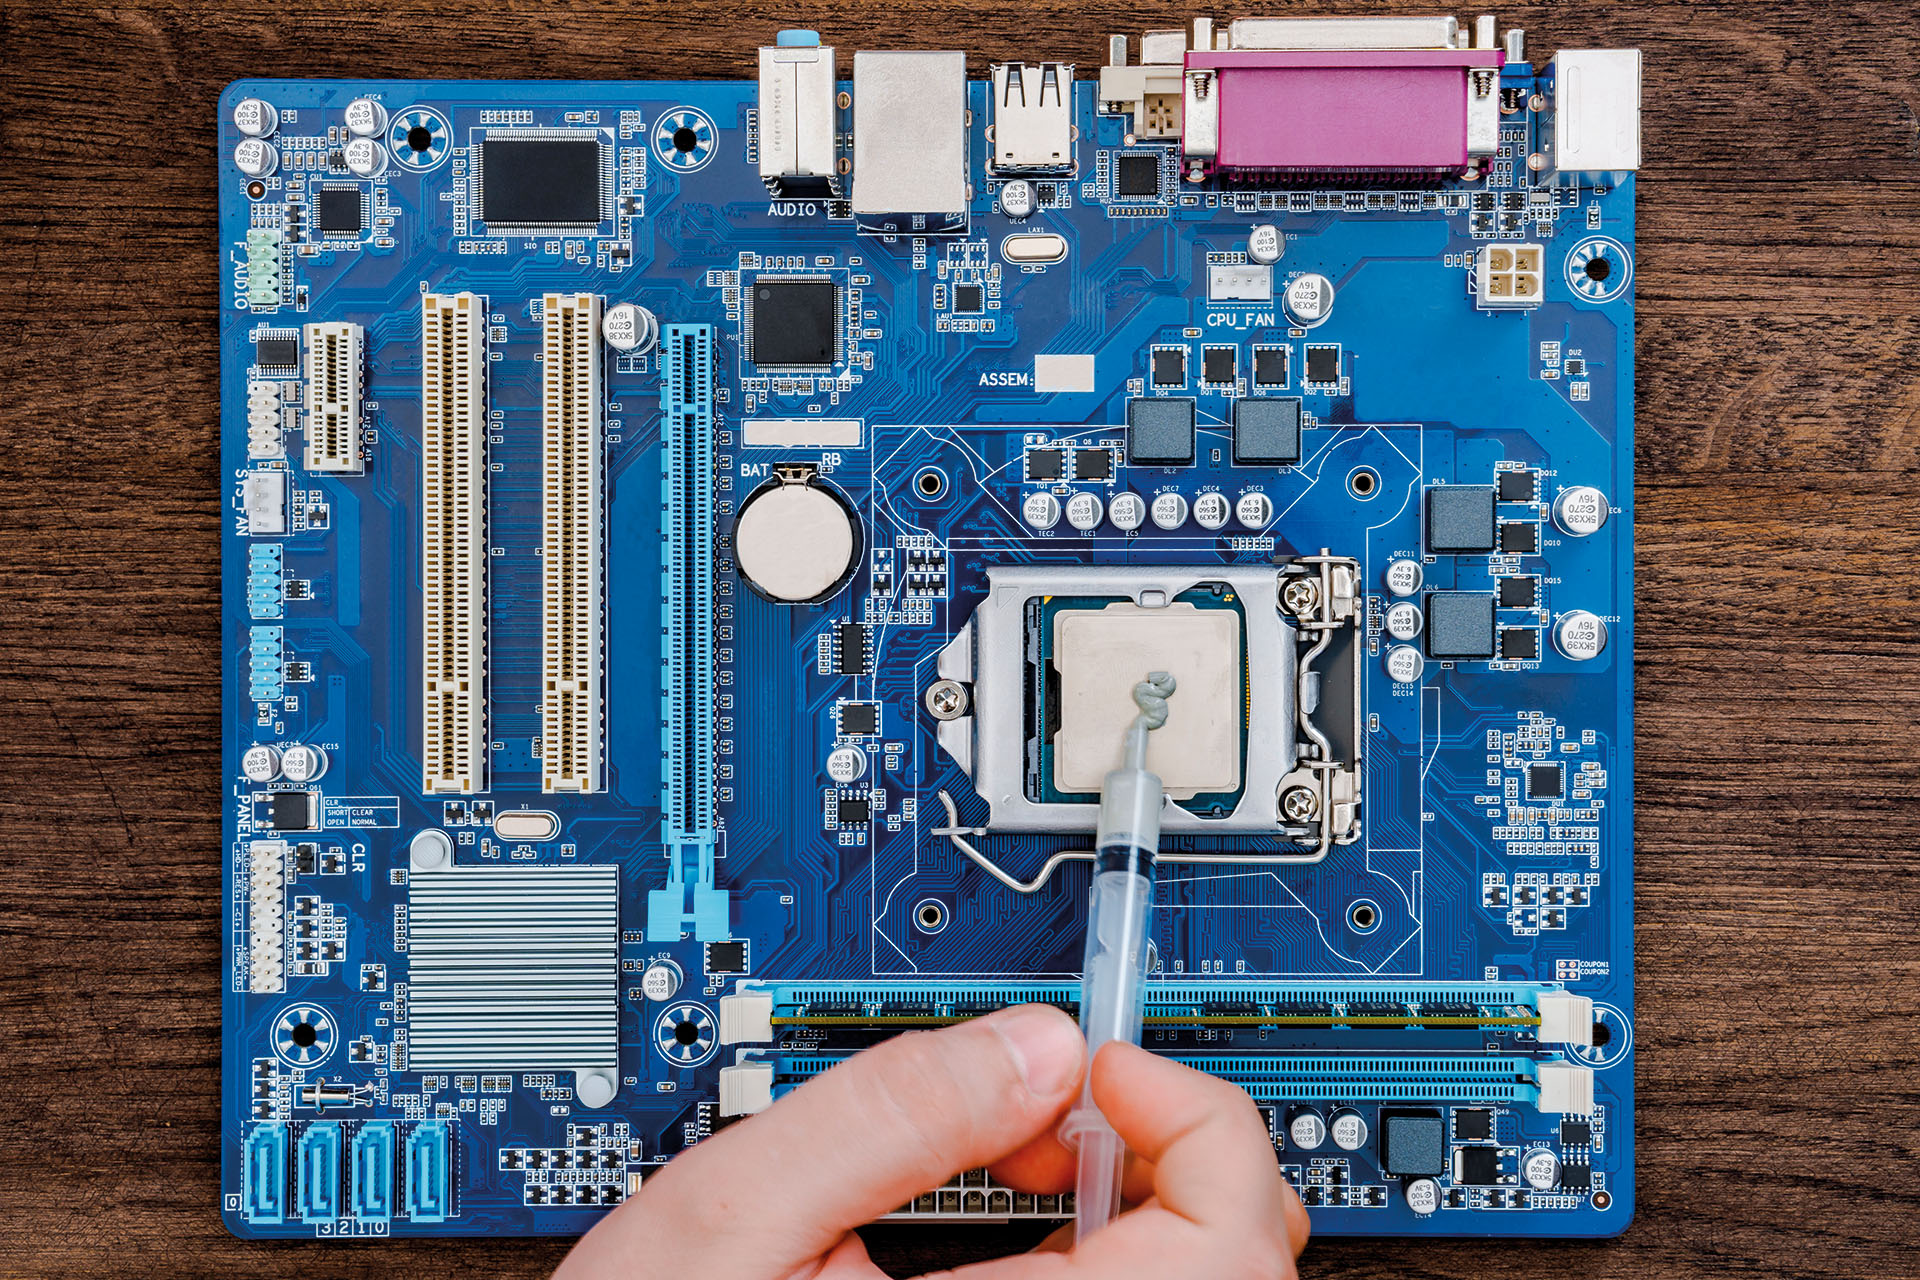 Thermal paste is applied to the CPU socket of a motherboard